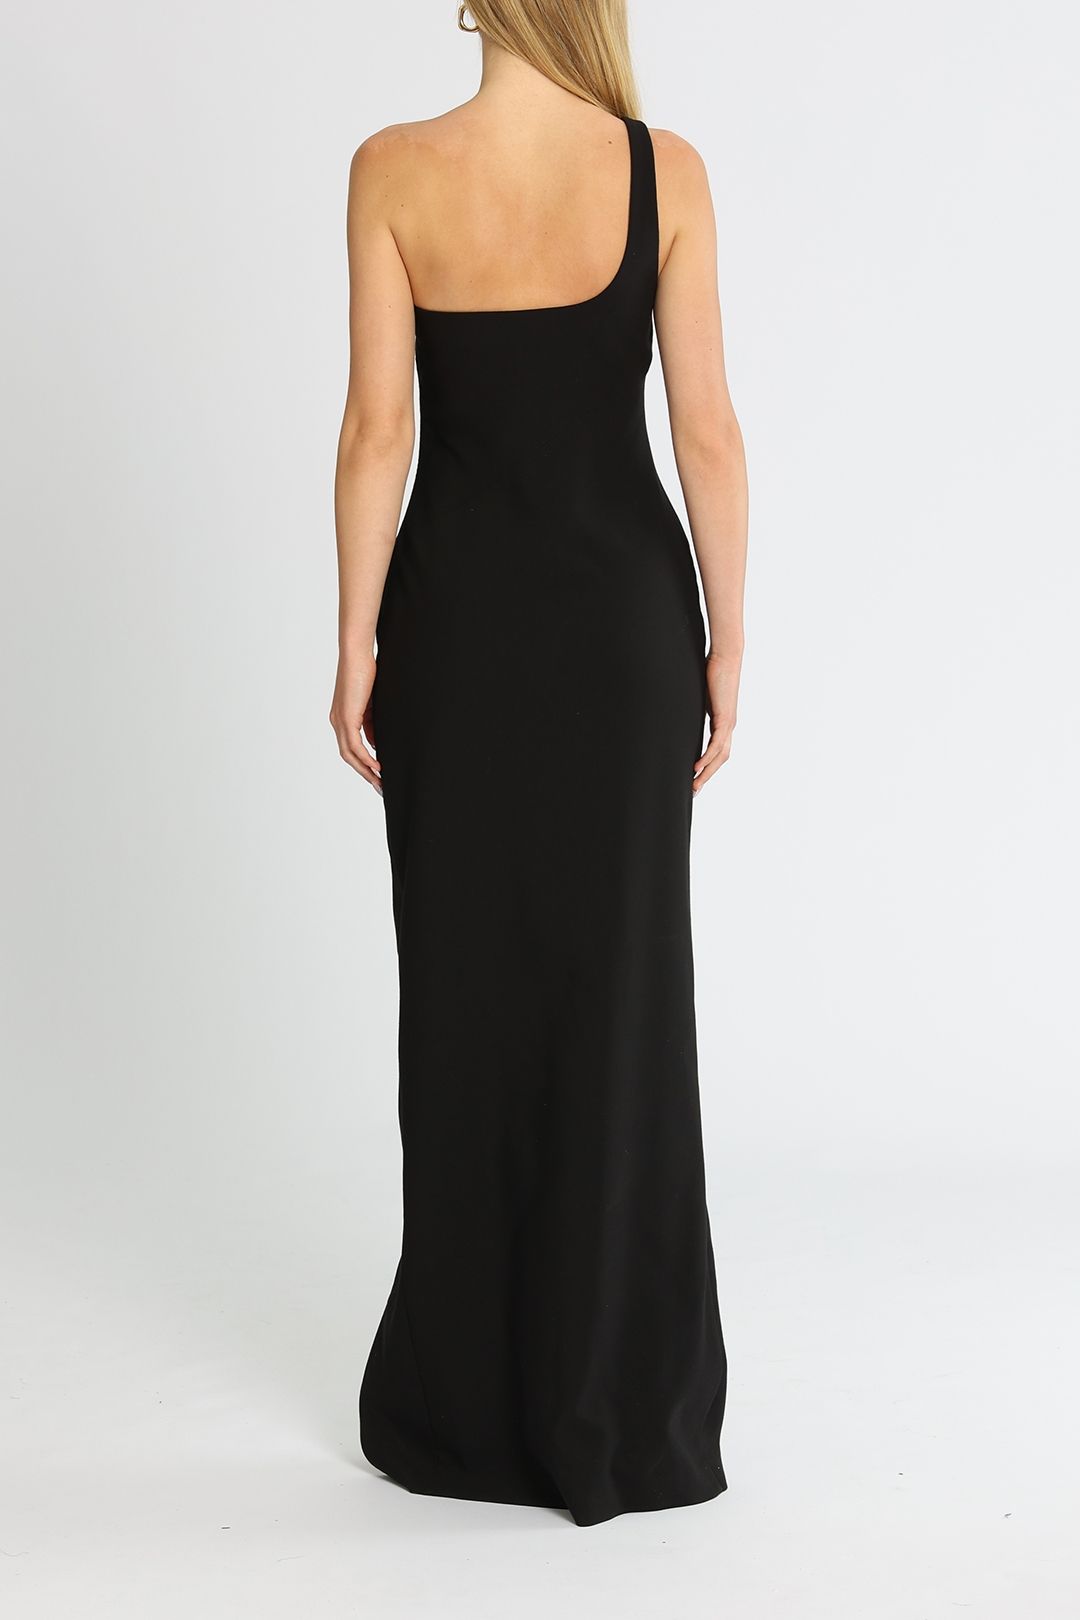 Likely NYC Camden Gown Black Sleeveless